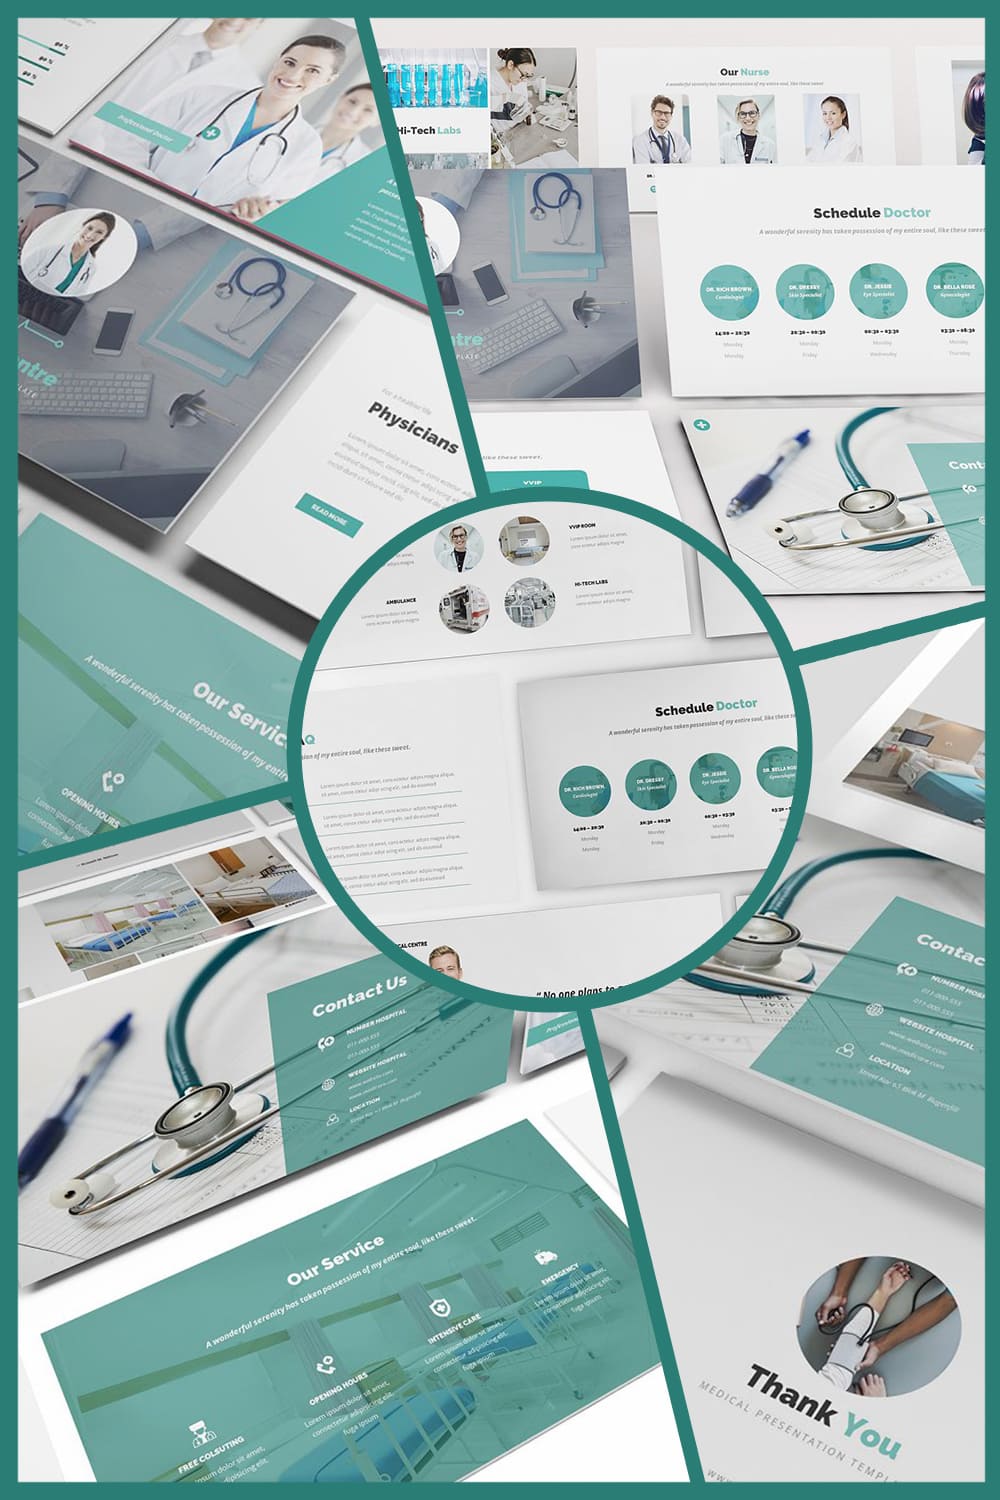 Medical Powerpoint Template is made with simple, clean and minimalist design concept. 